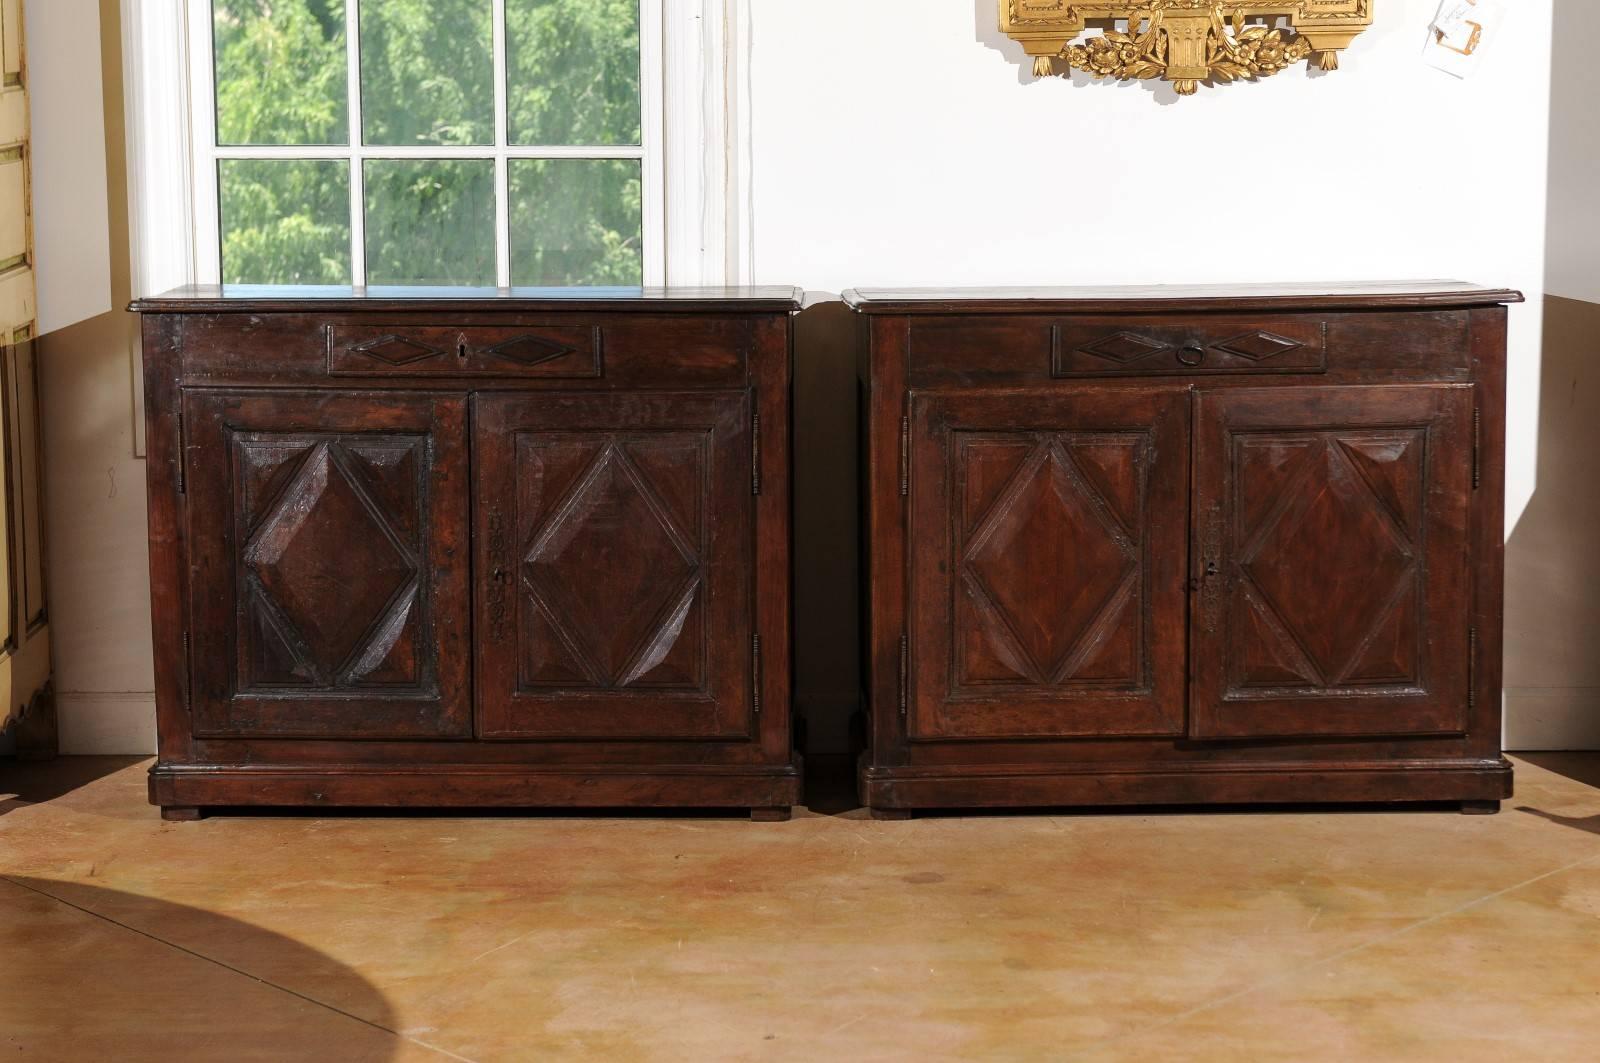 A pair of French walnut buffets from the 18th century with diamond pattern motifs on the doors. Each of this pair of French 18th century buffets features a rectangular top with rounded edge over a central single hand-cut dovetailed drawer. Two doors